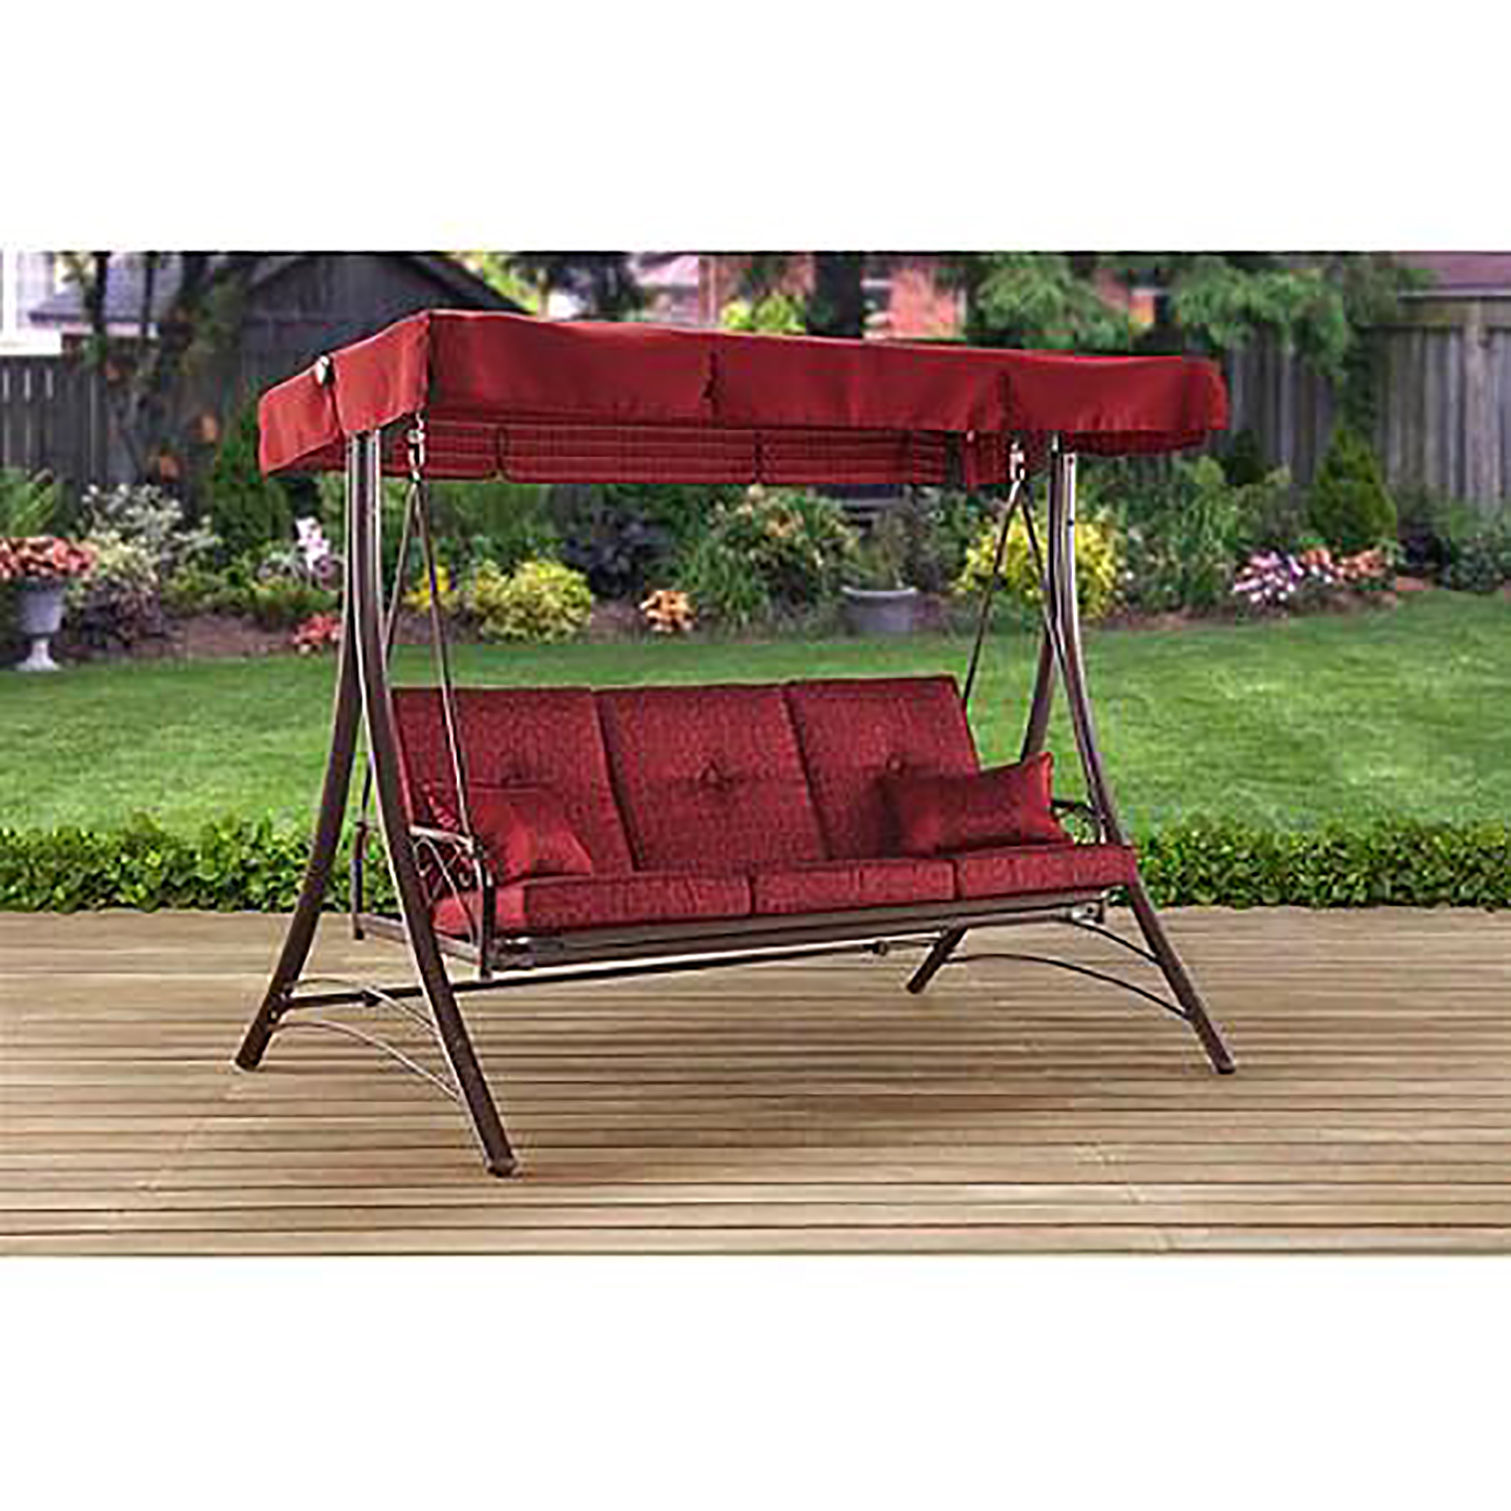 Lovely Patio Swings With Canopy Outdoor Daybed Porch Swing Red Patio ...